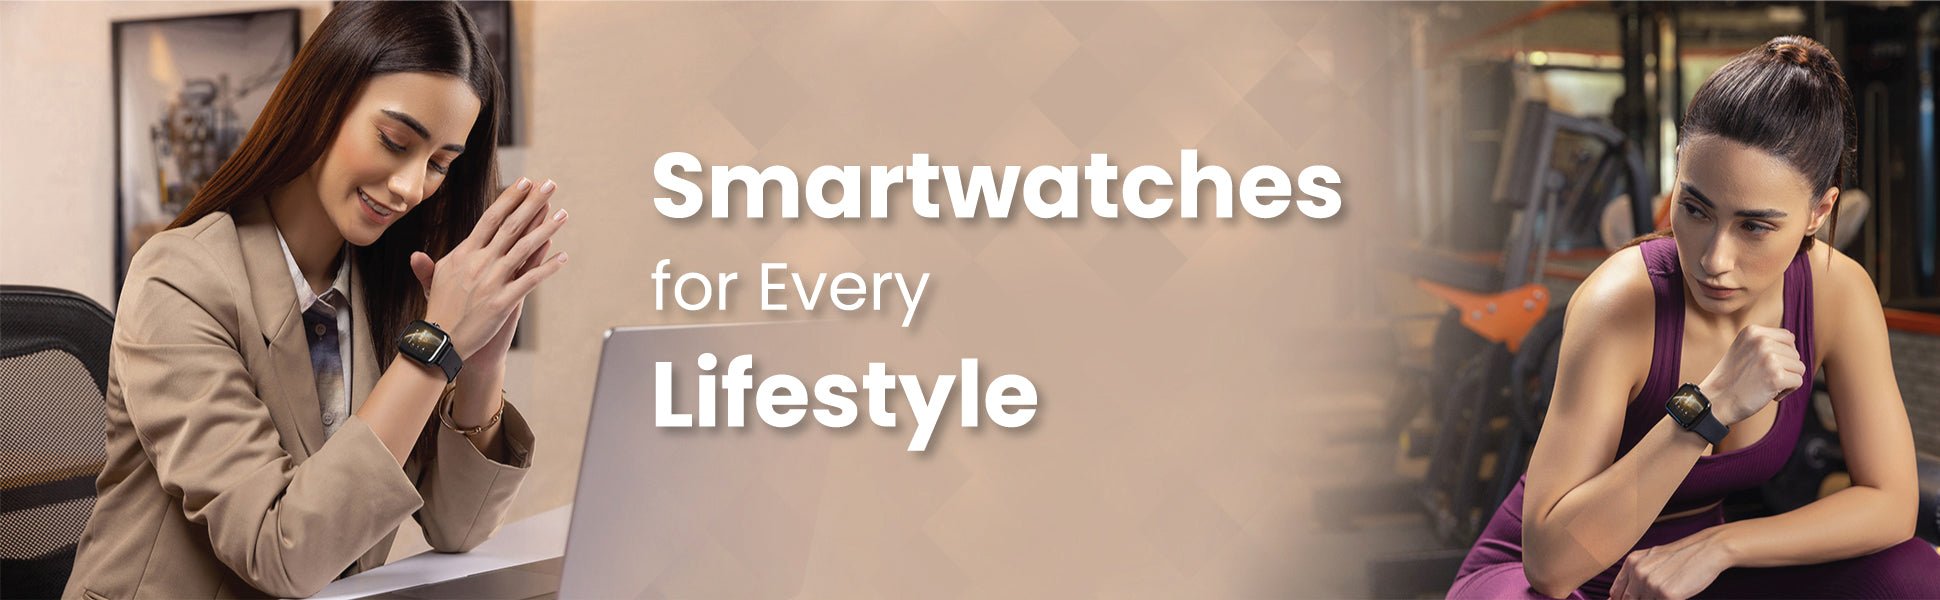 Smartwatches for every lifestyle